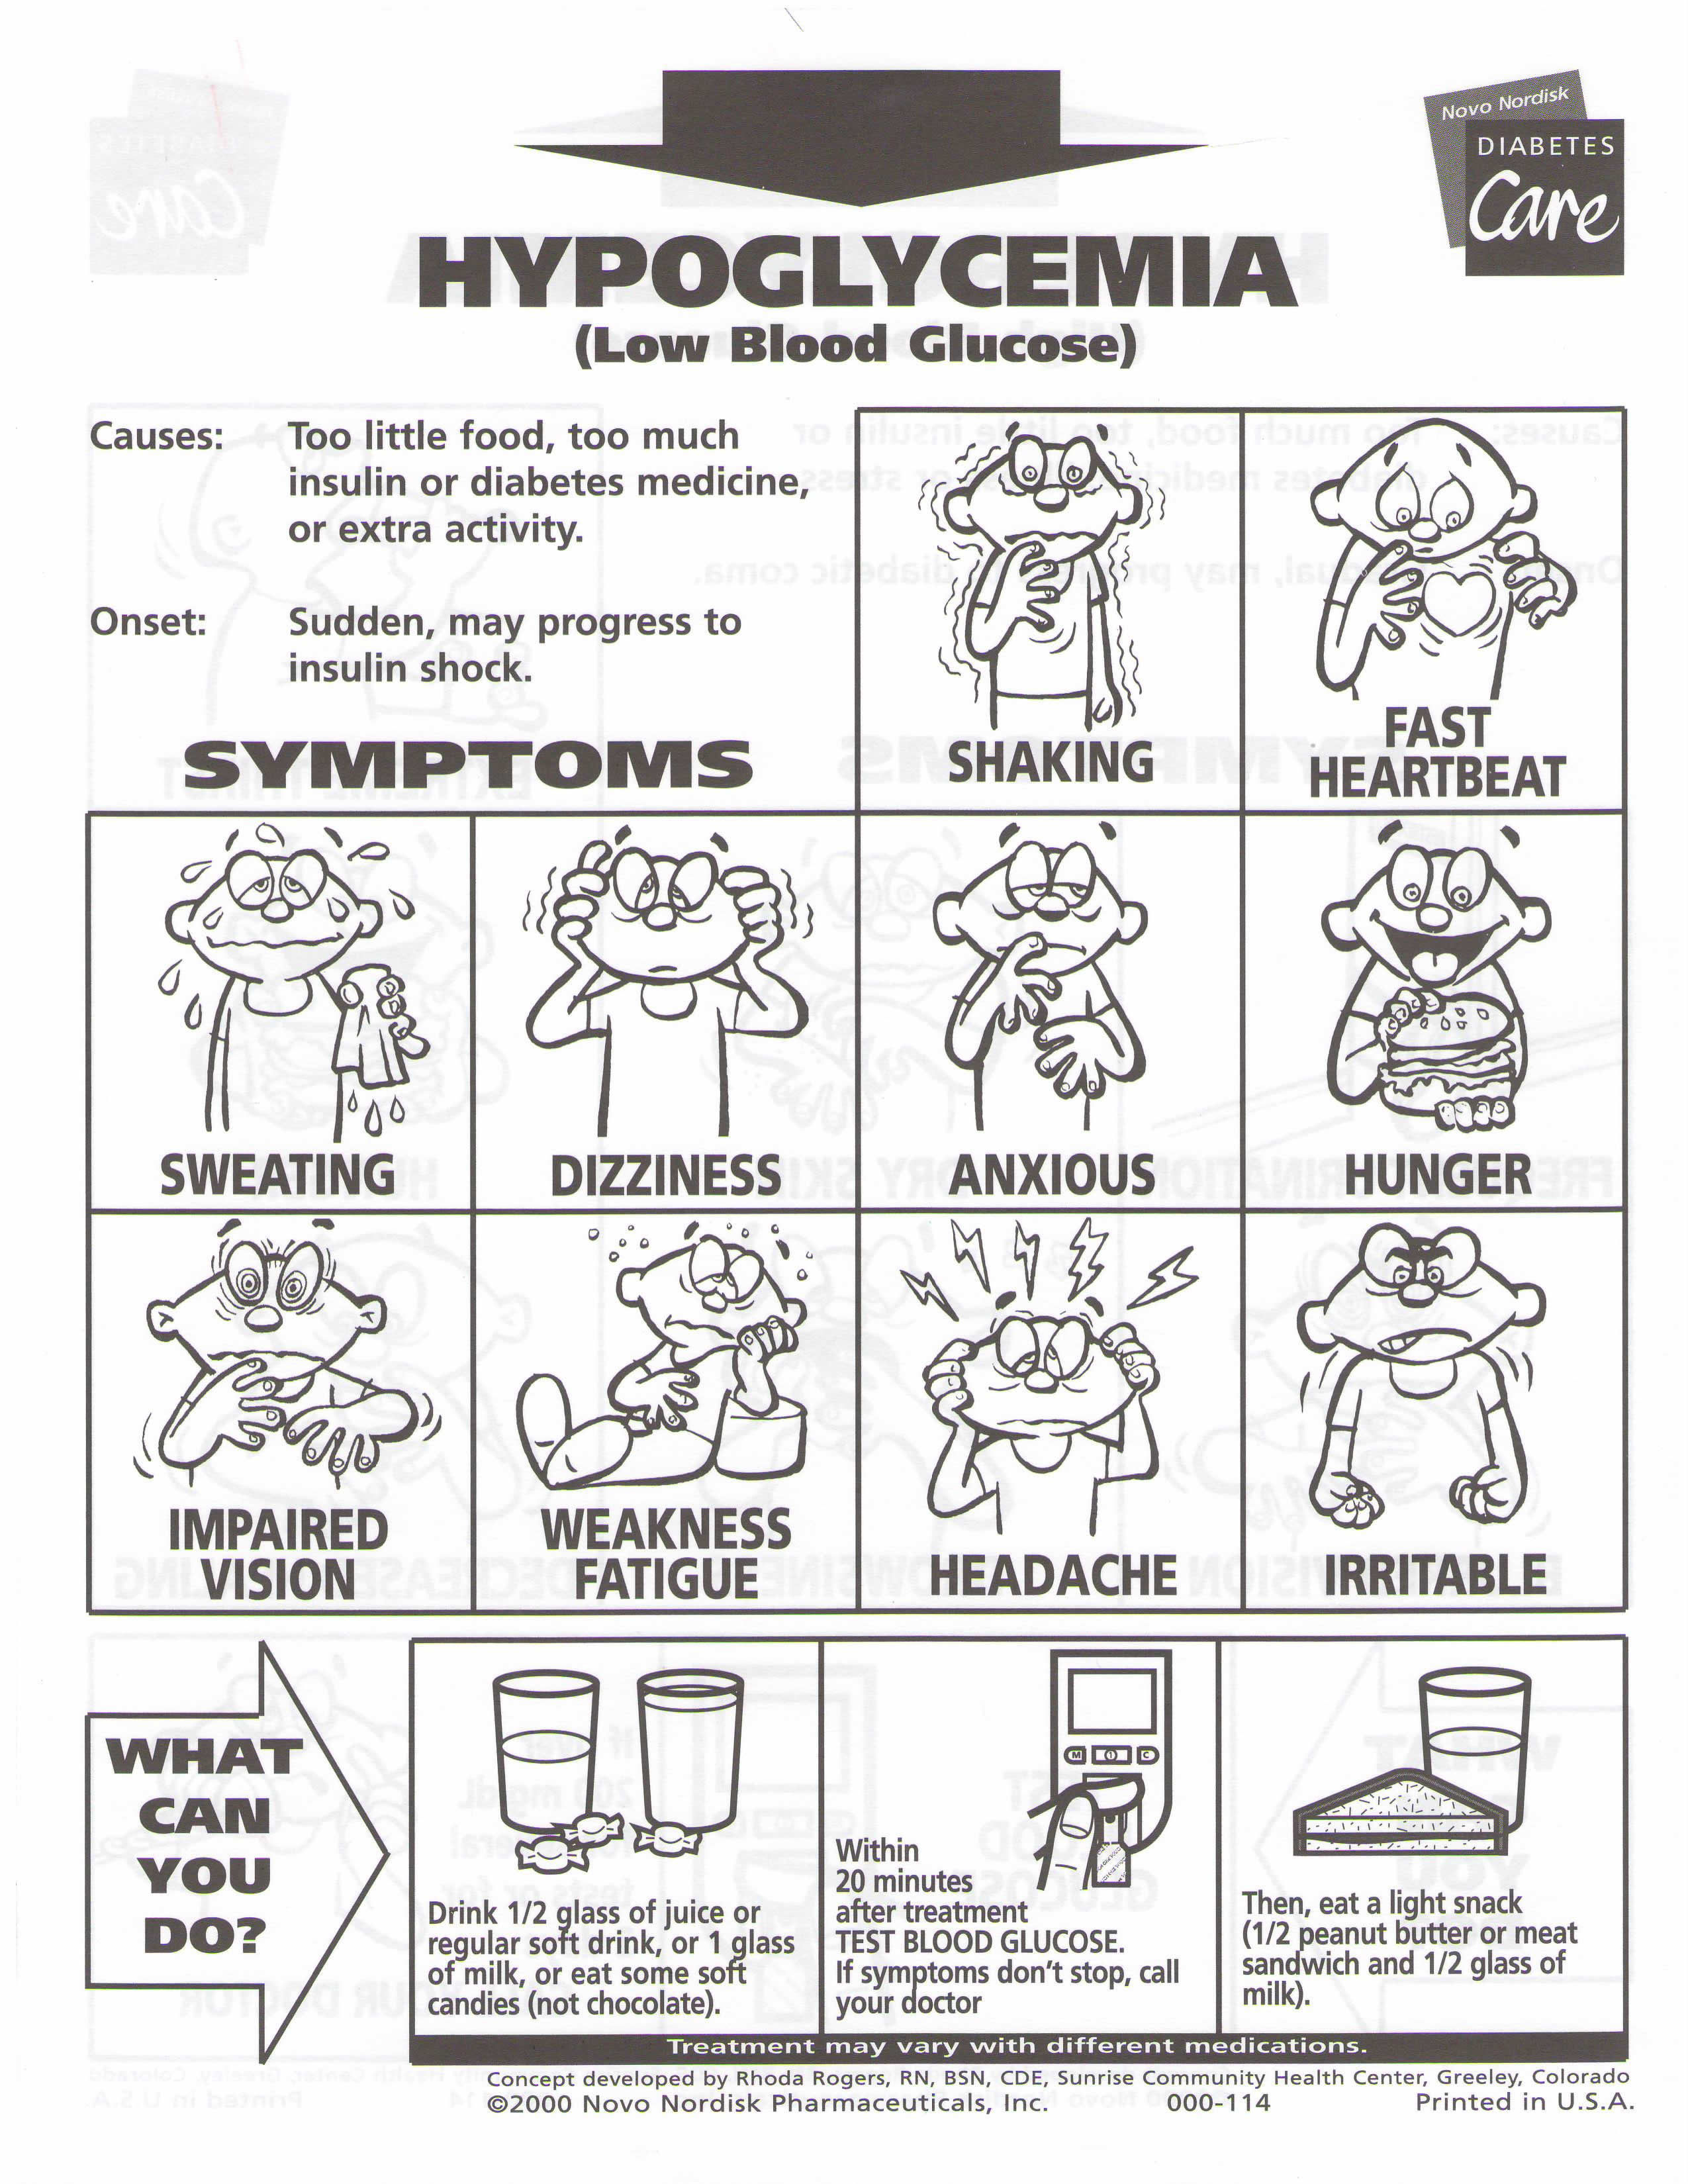 Hypoglycemia And Hyperglycemia Signs And Symptoms Chart